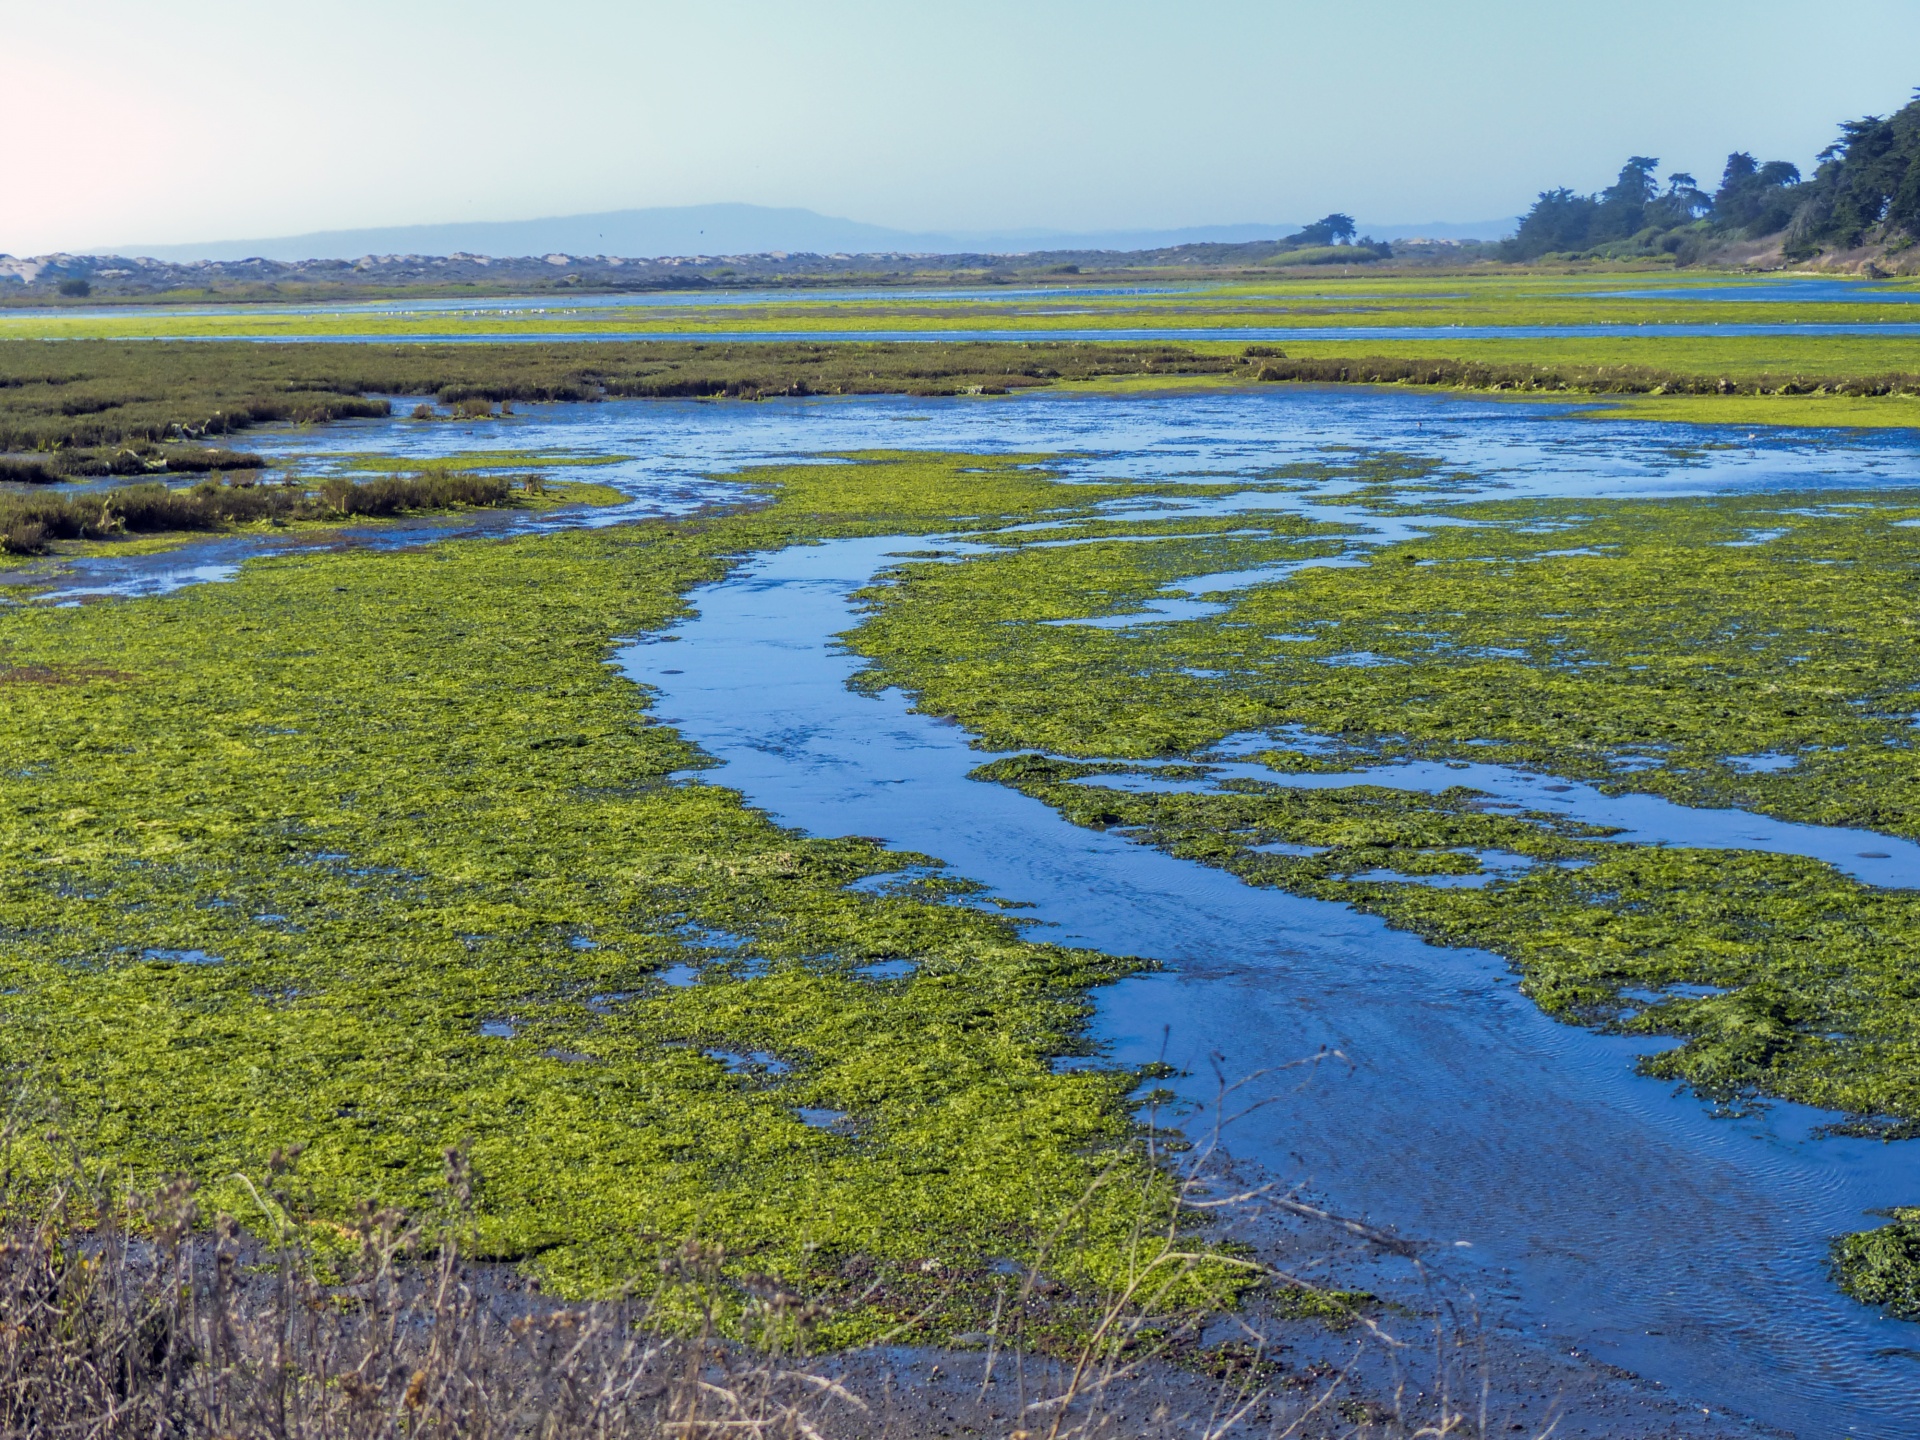 Wetlands are a protected area for birds and this is in Northern California